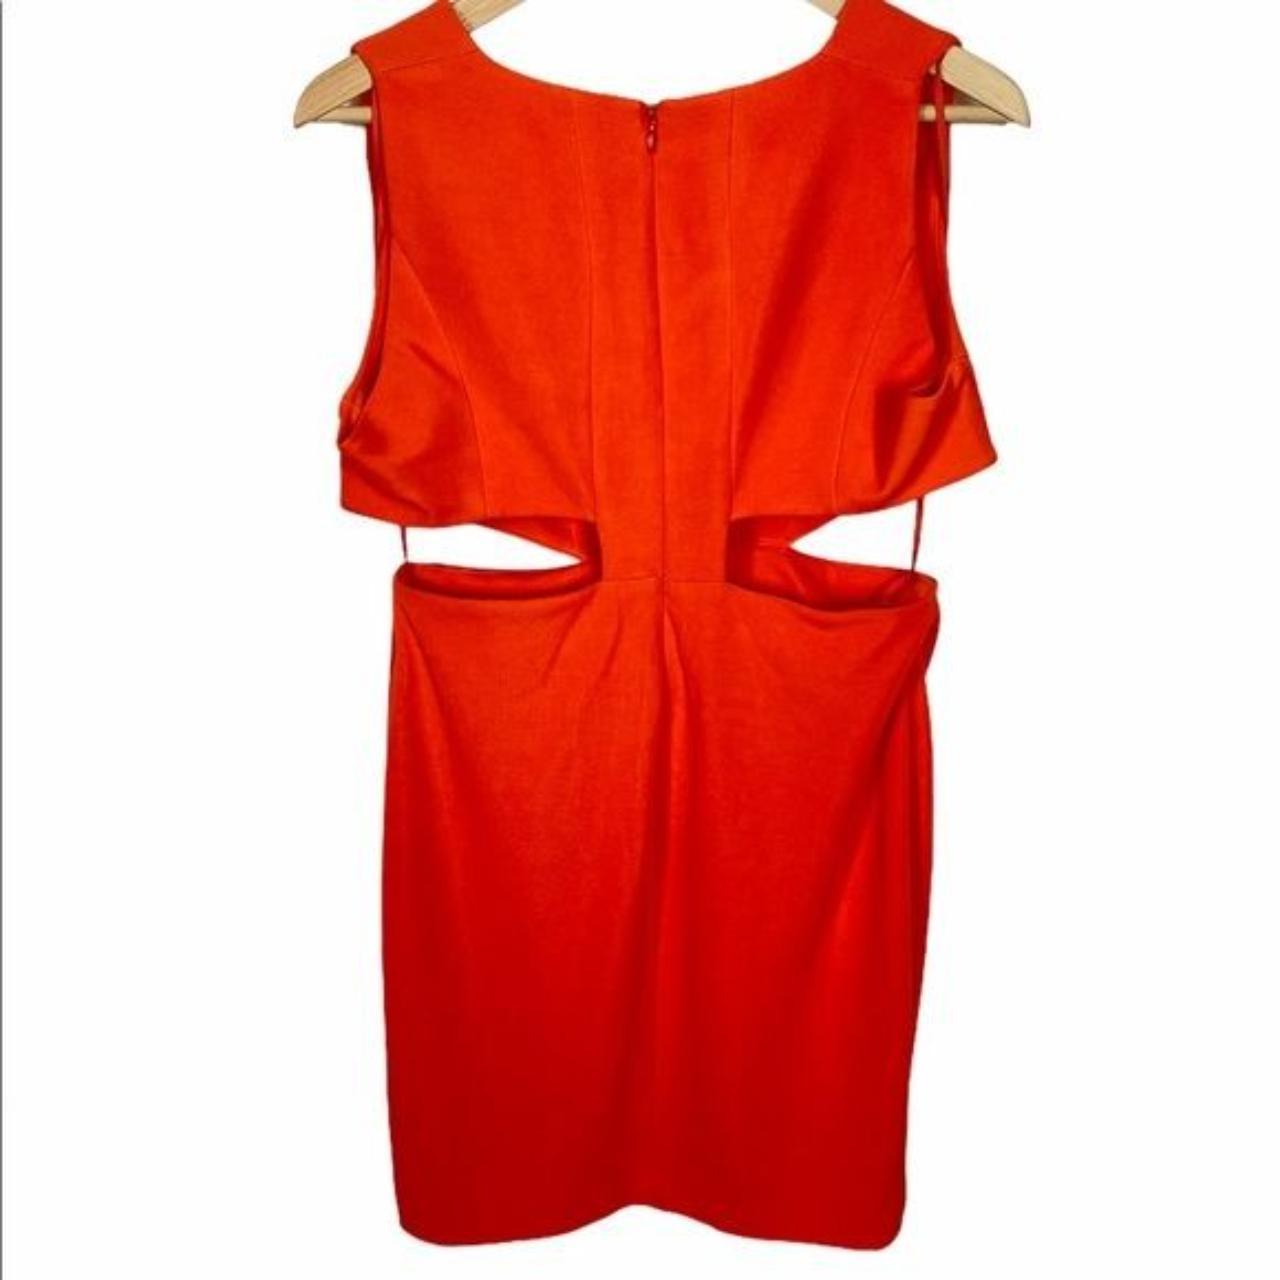 Product Image 2 - Details
Size 8
Bust-18”
Length-33.5”
Color orange

Are you ready